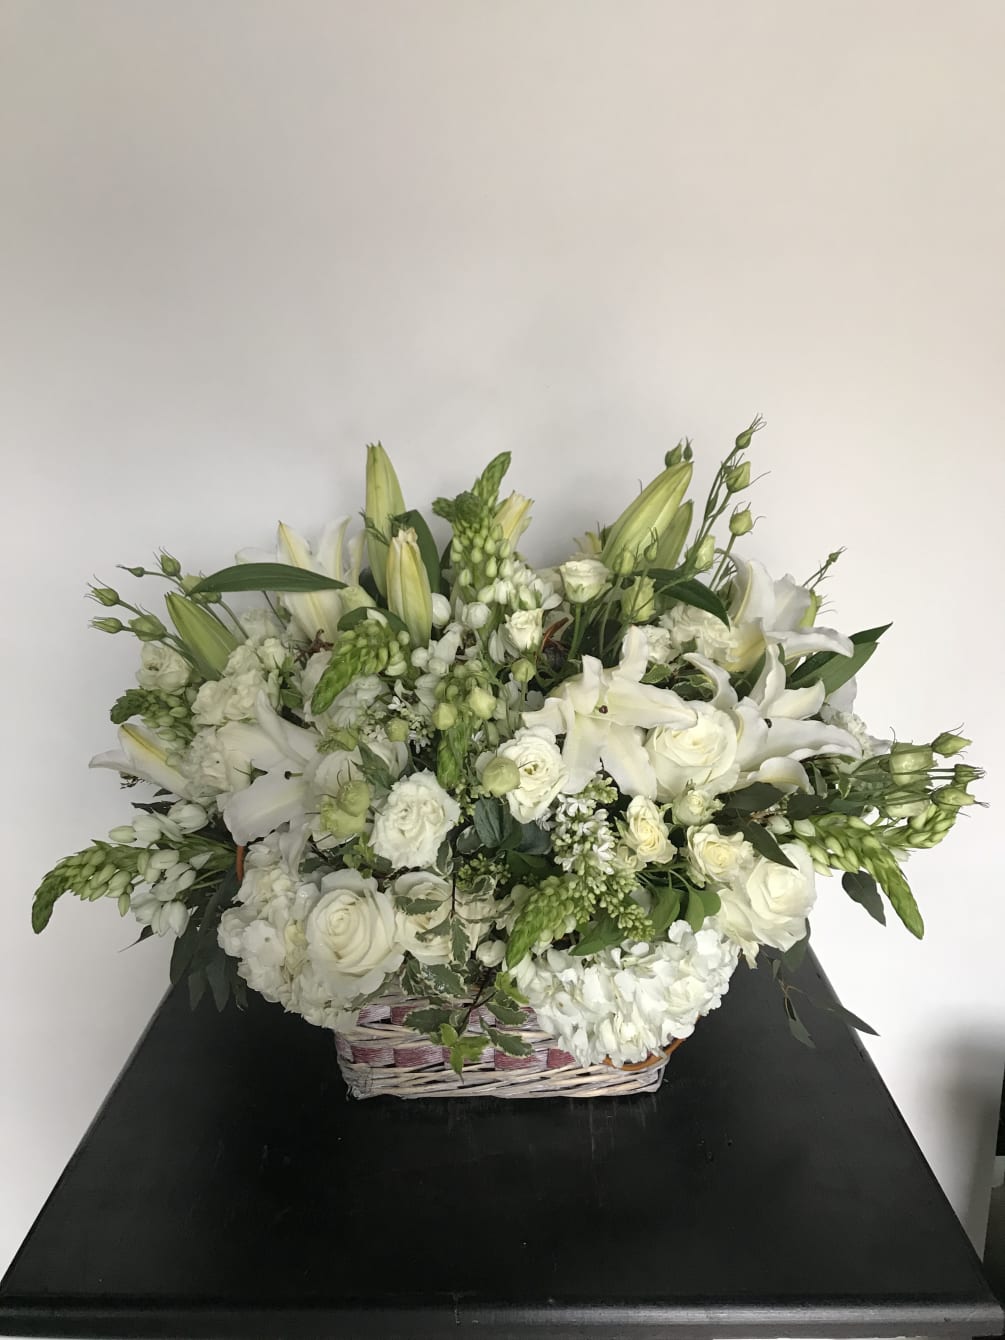 Lilies, roses, hydrangea, herbs and ivy